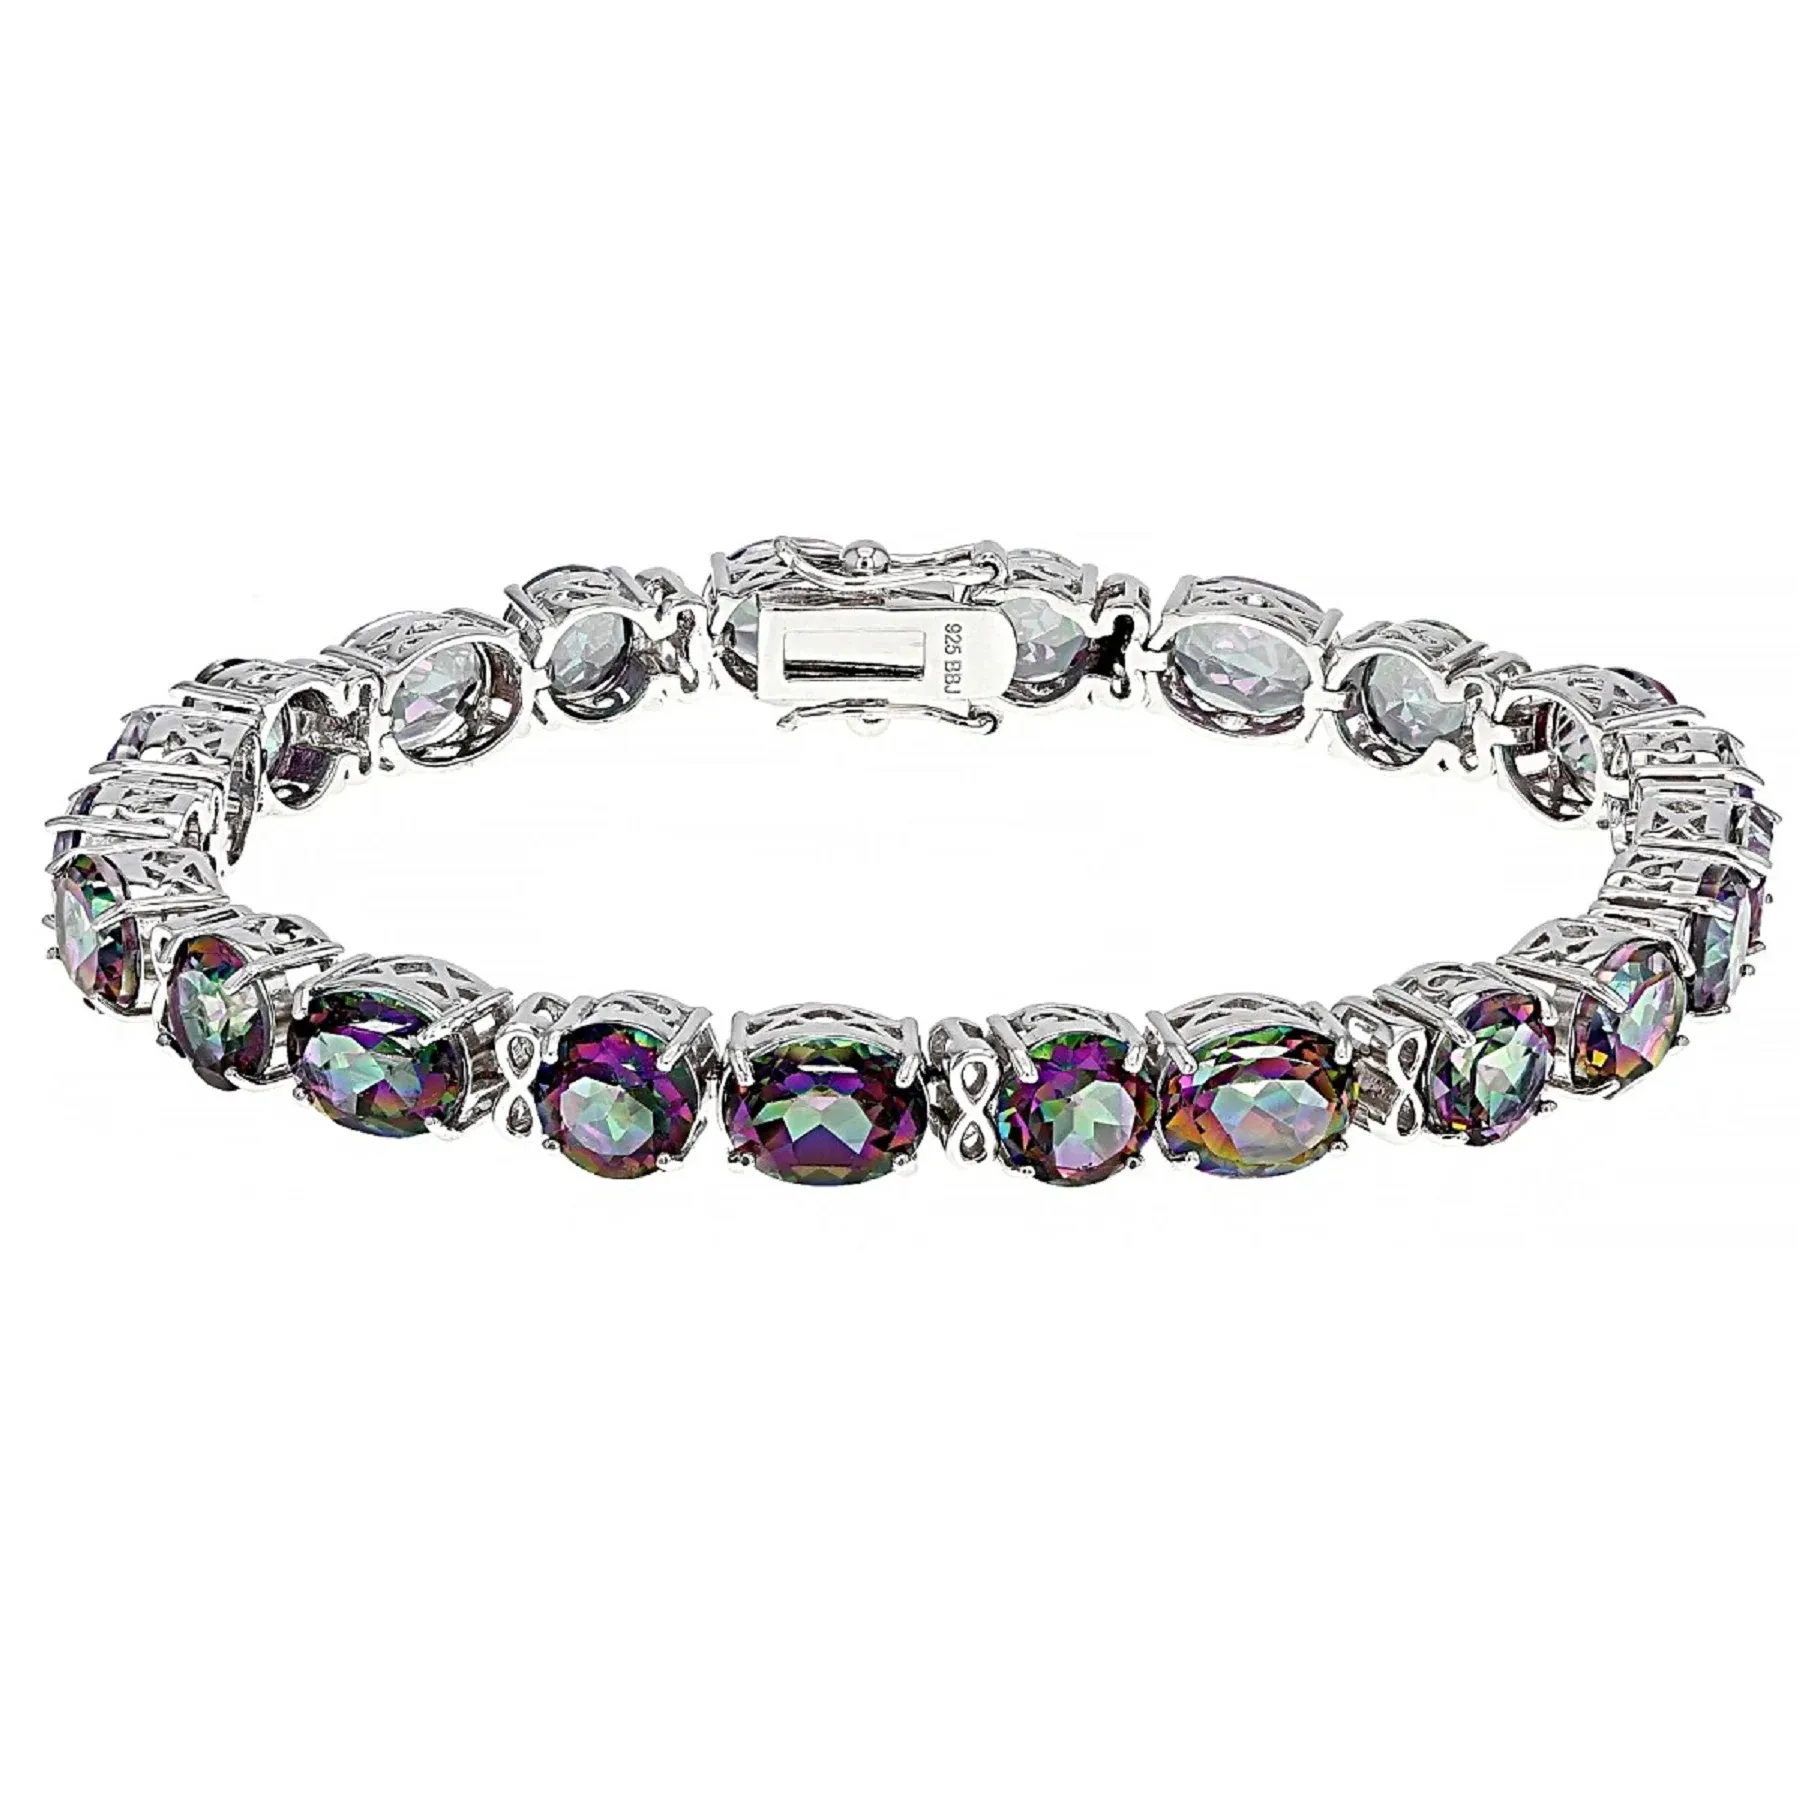 Mystic Topaz Silver Bracelet Fashionable charm crafted with Silver 925 Elevate your style with this elegant women's jewelry